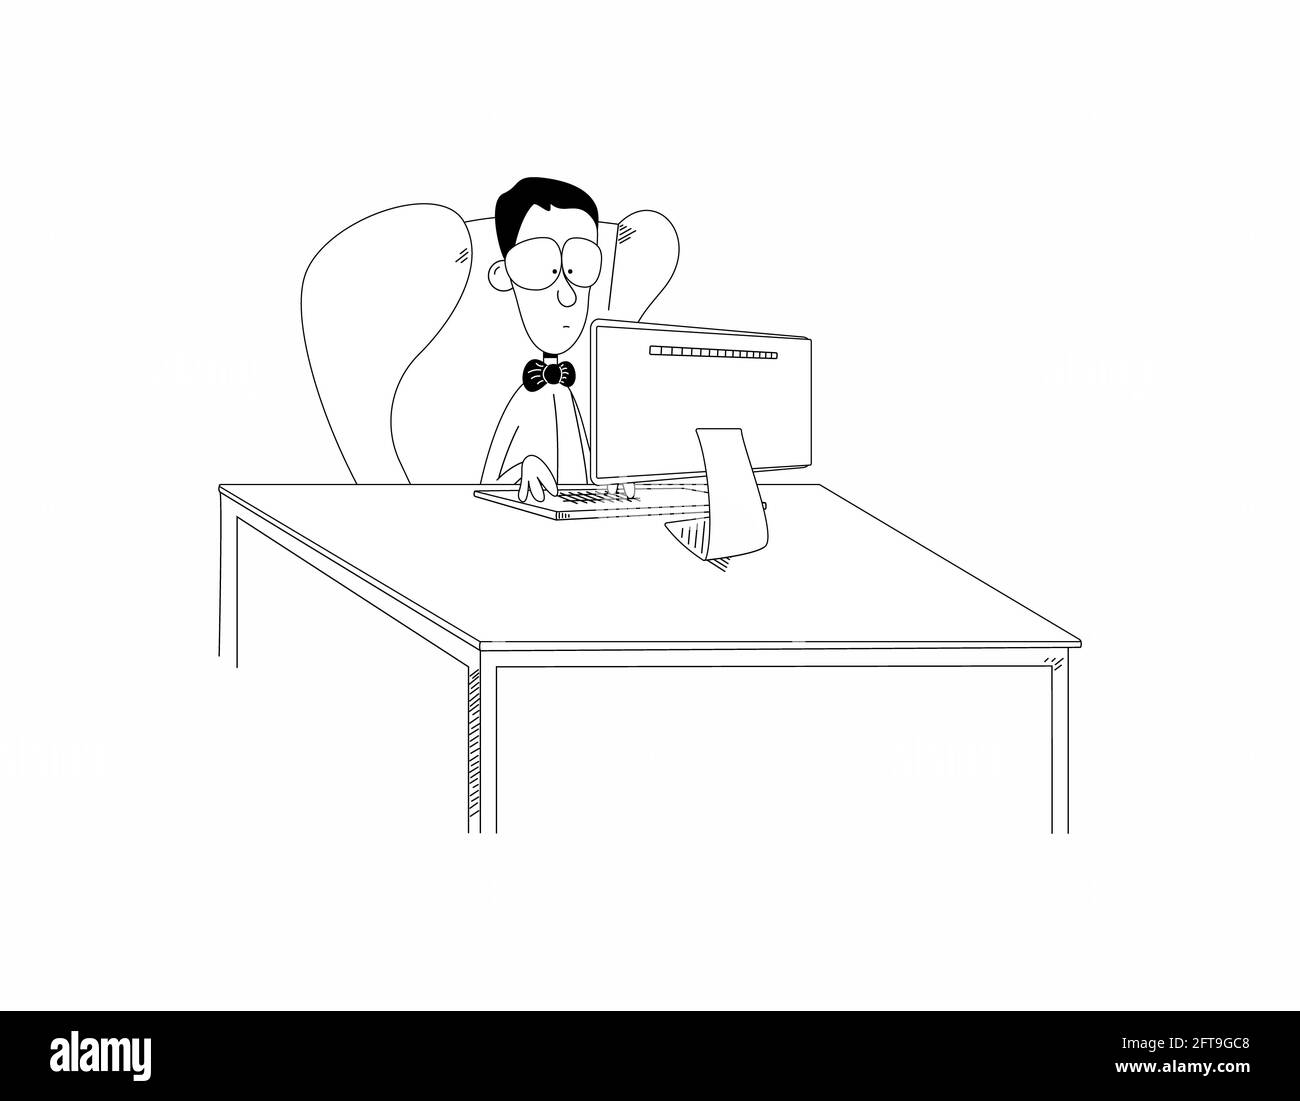 Funny cartoon man or nerd boy sit in chair at desk working on computer. Funny guy clerk or student with bow tie and glasses looks at monitor.Raster Stock Photo